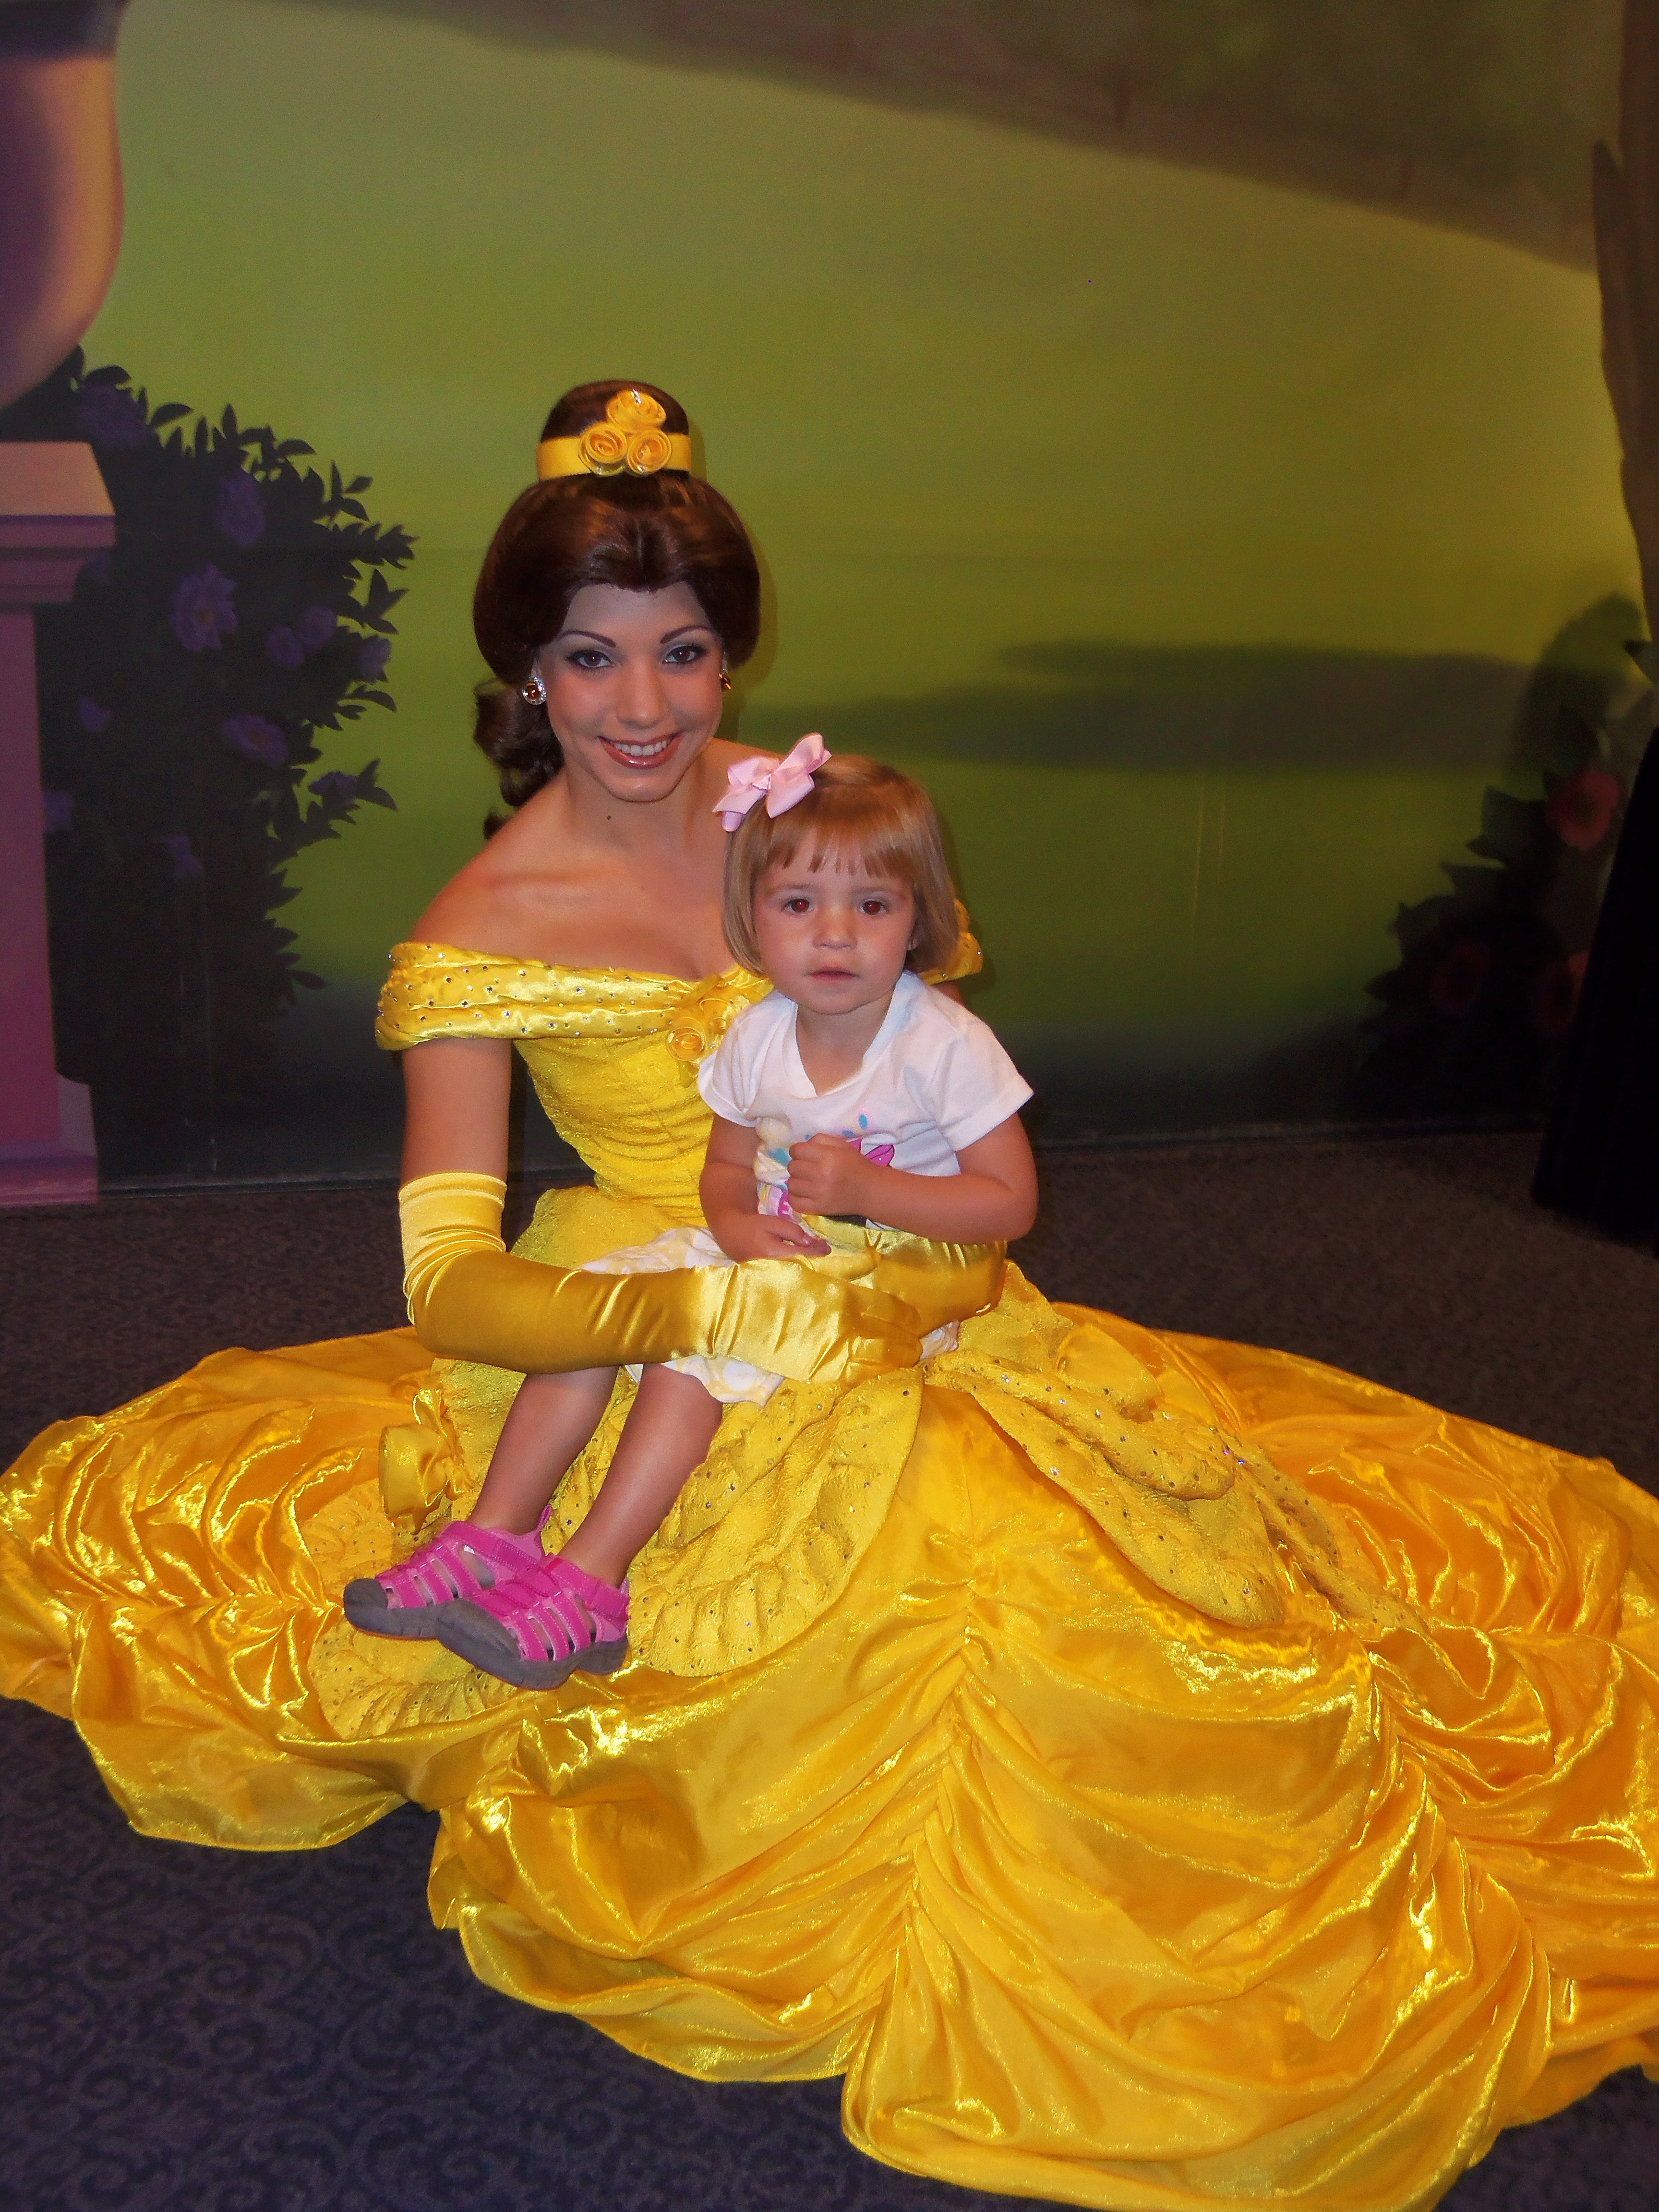 Belle was still offering meets back then in the Magic Kingdom